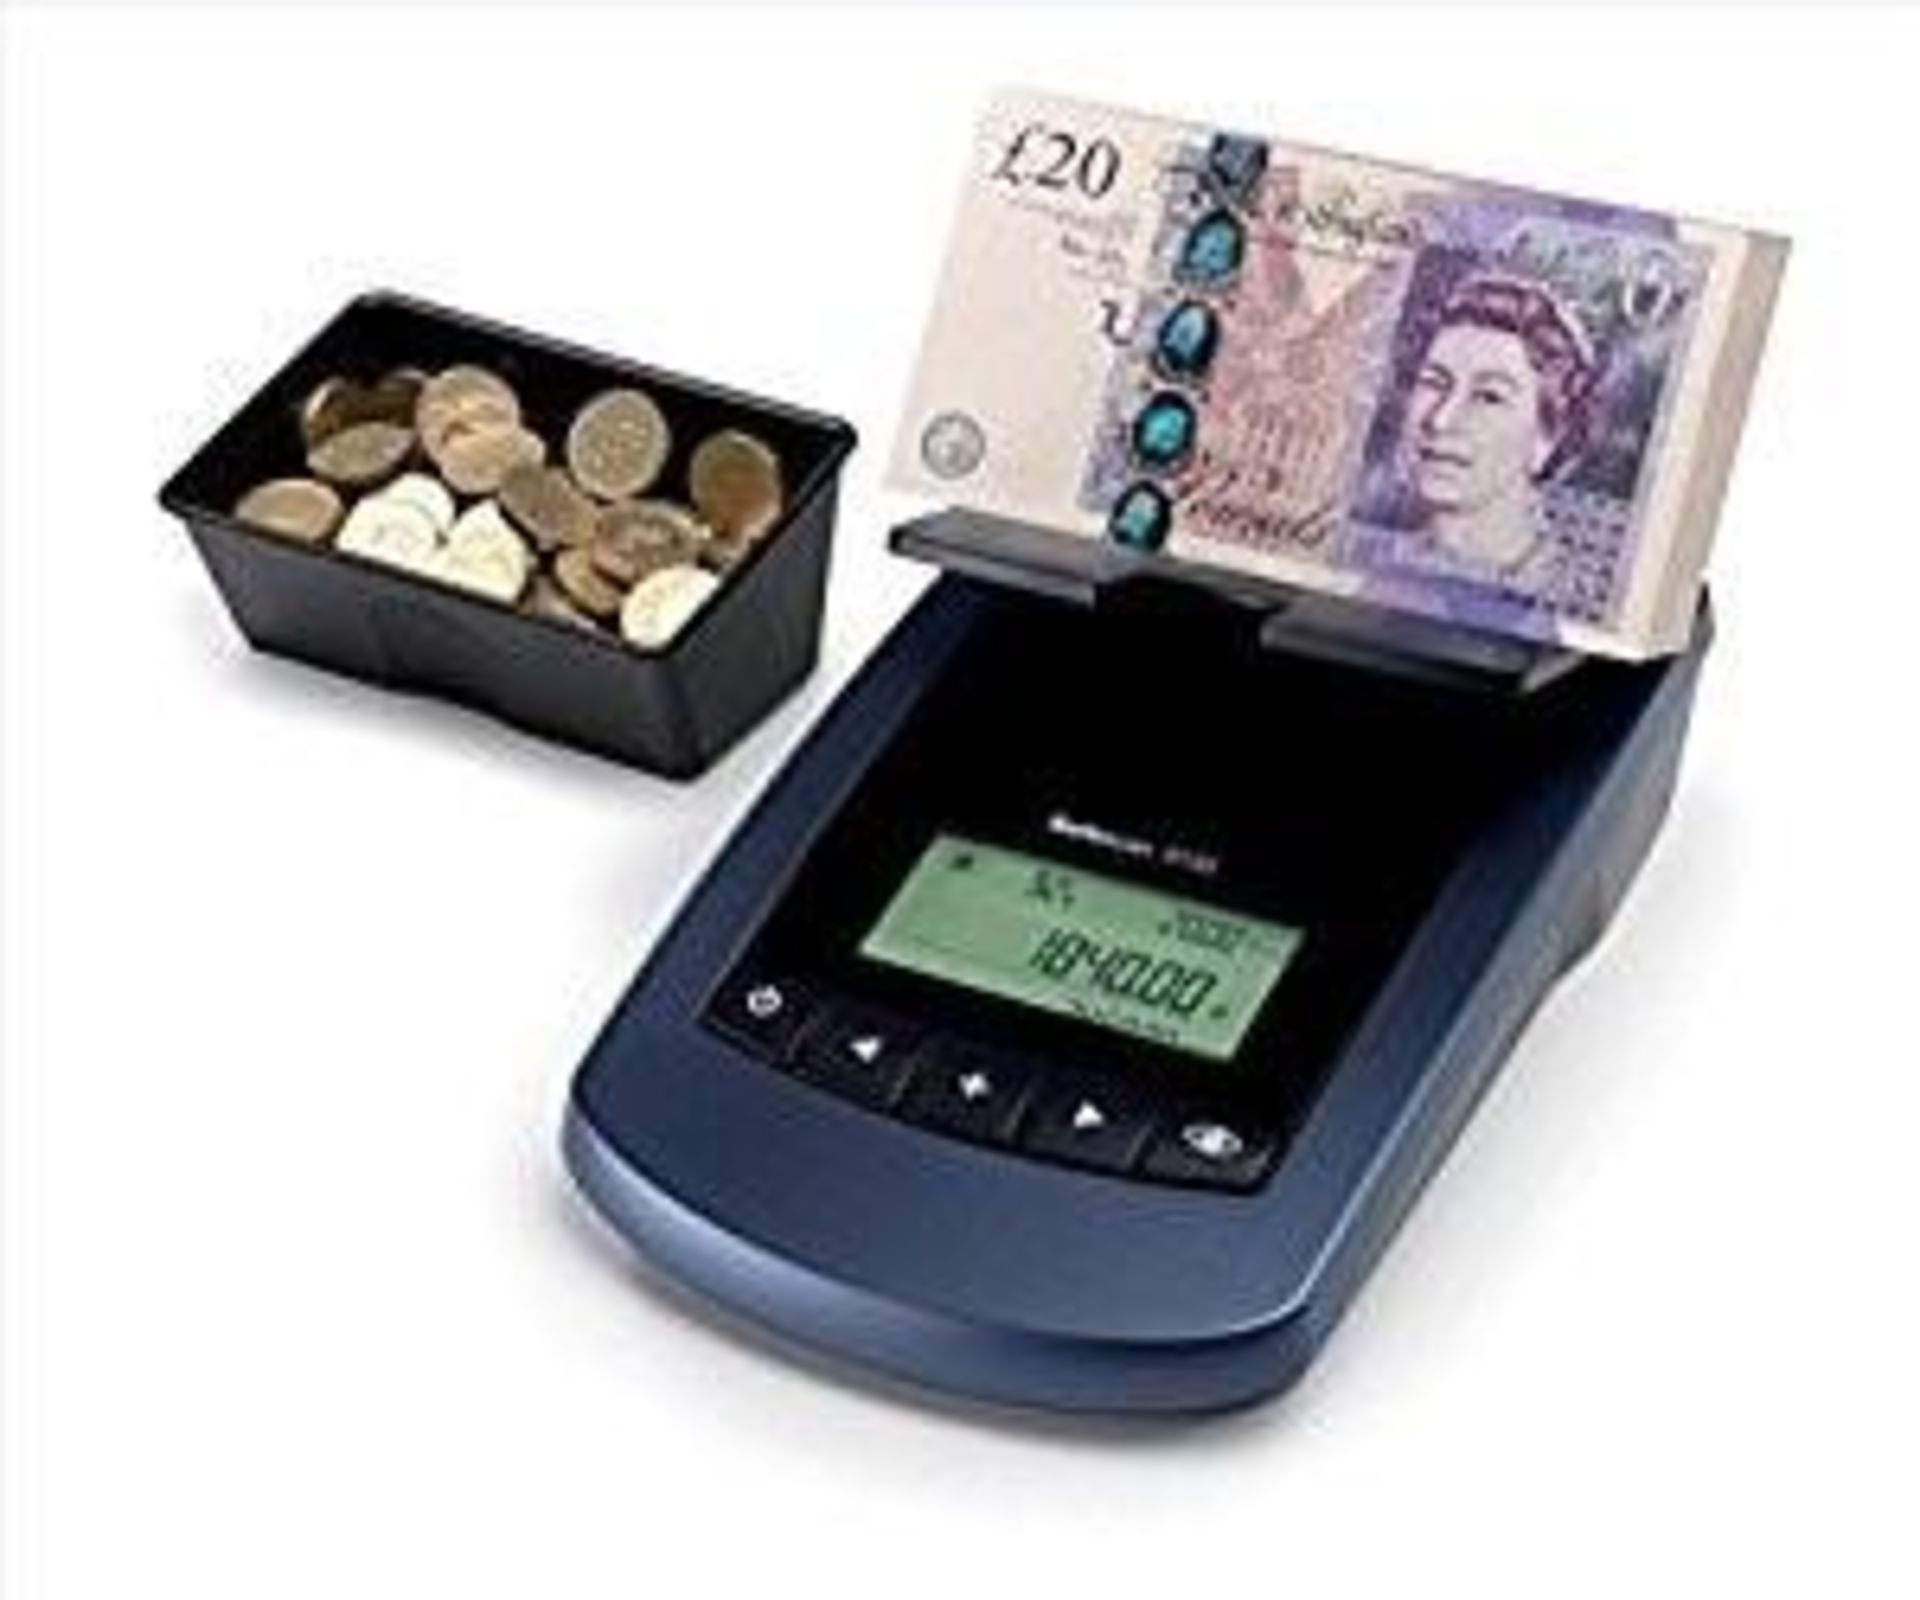 1 x SafeScan 6155 Coin and Bank Note Counter - Includes Coin and Note Trays, Box, Instructions and